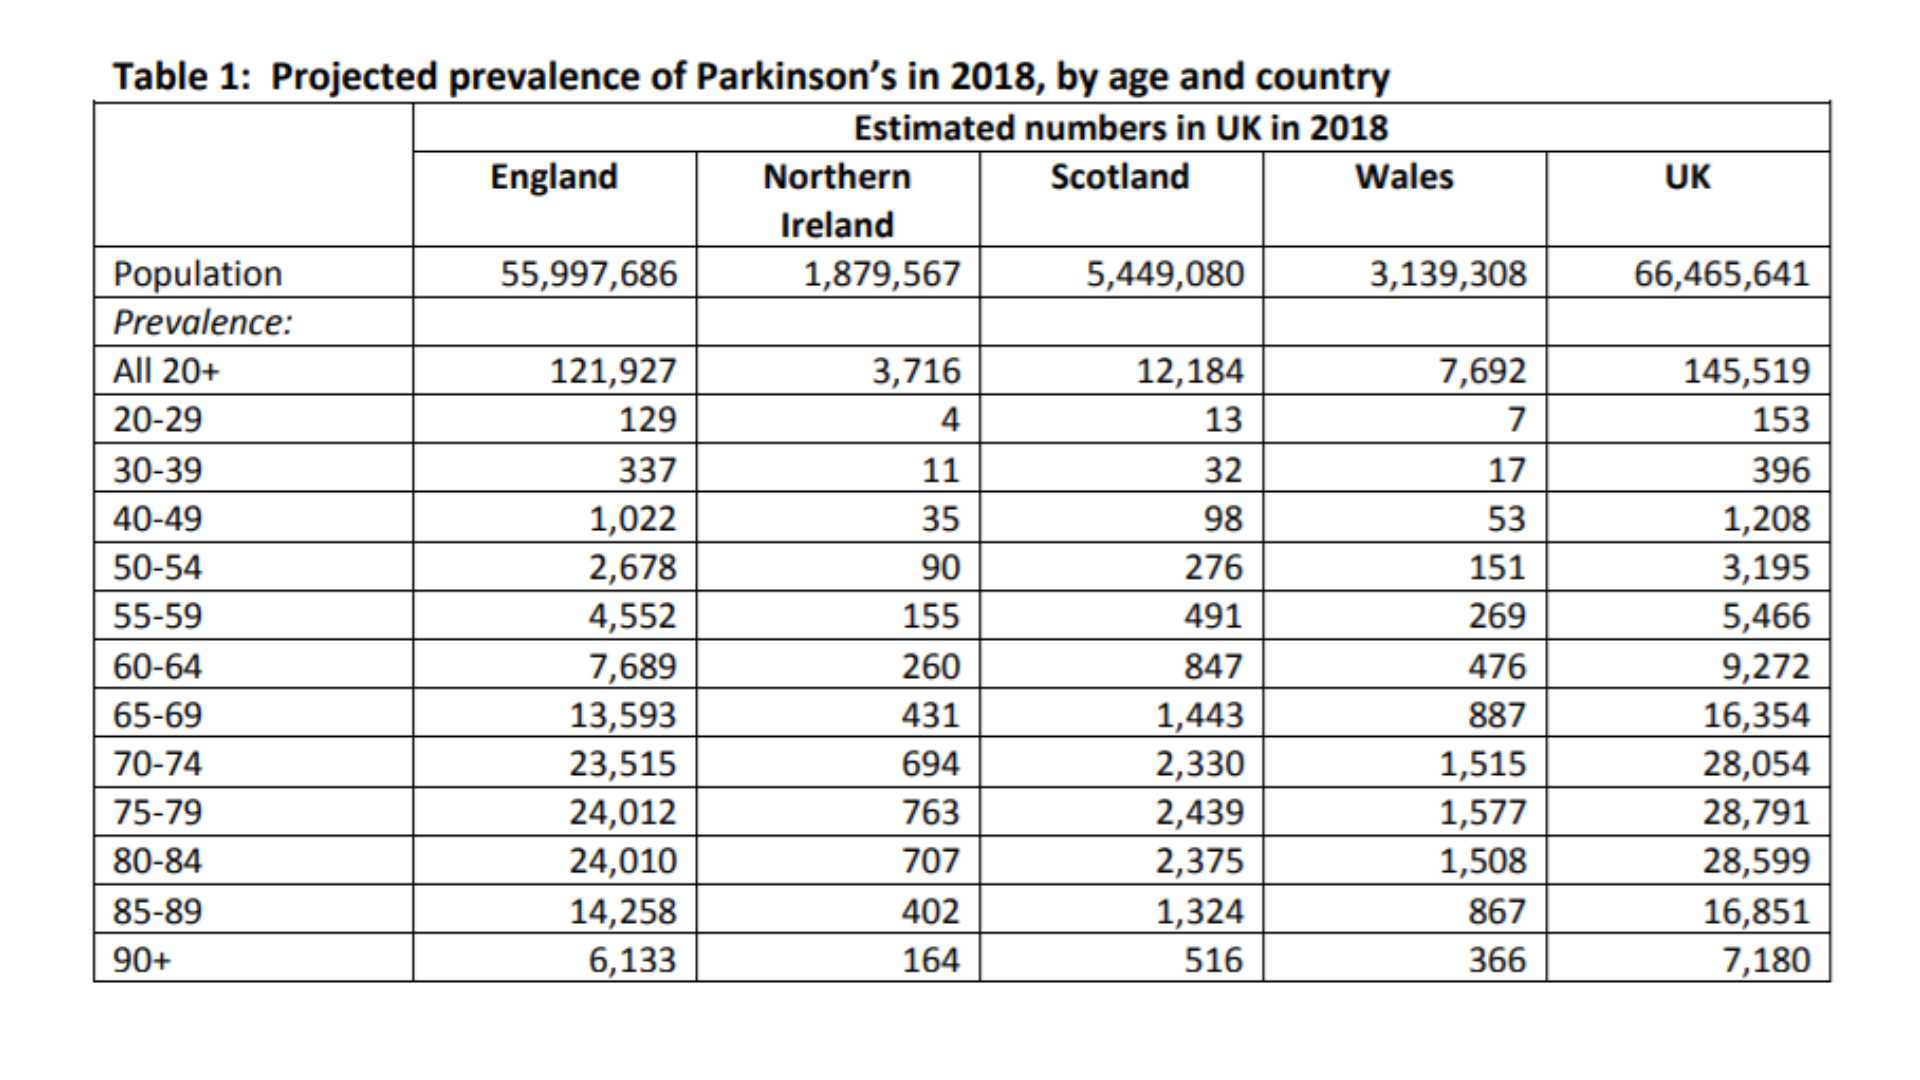 Table 1: Projected prevalence of Parkinson's in 2018, by age and country